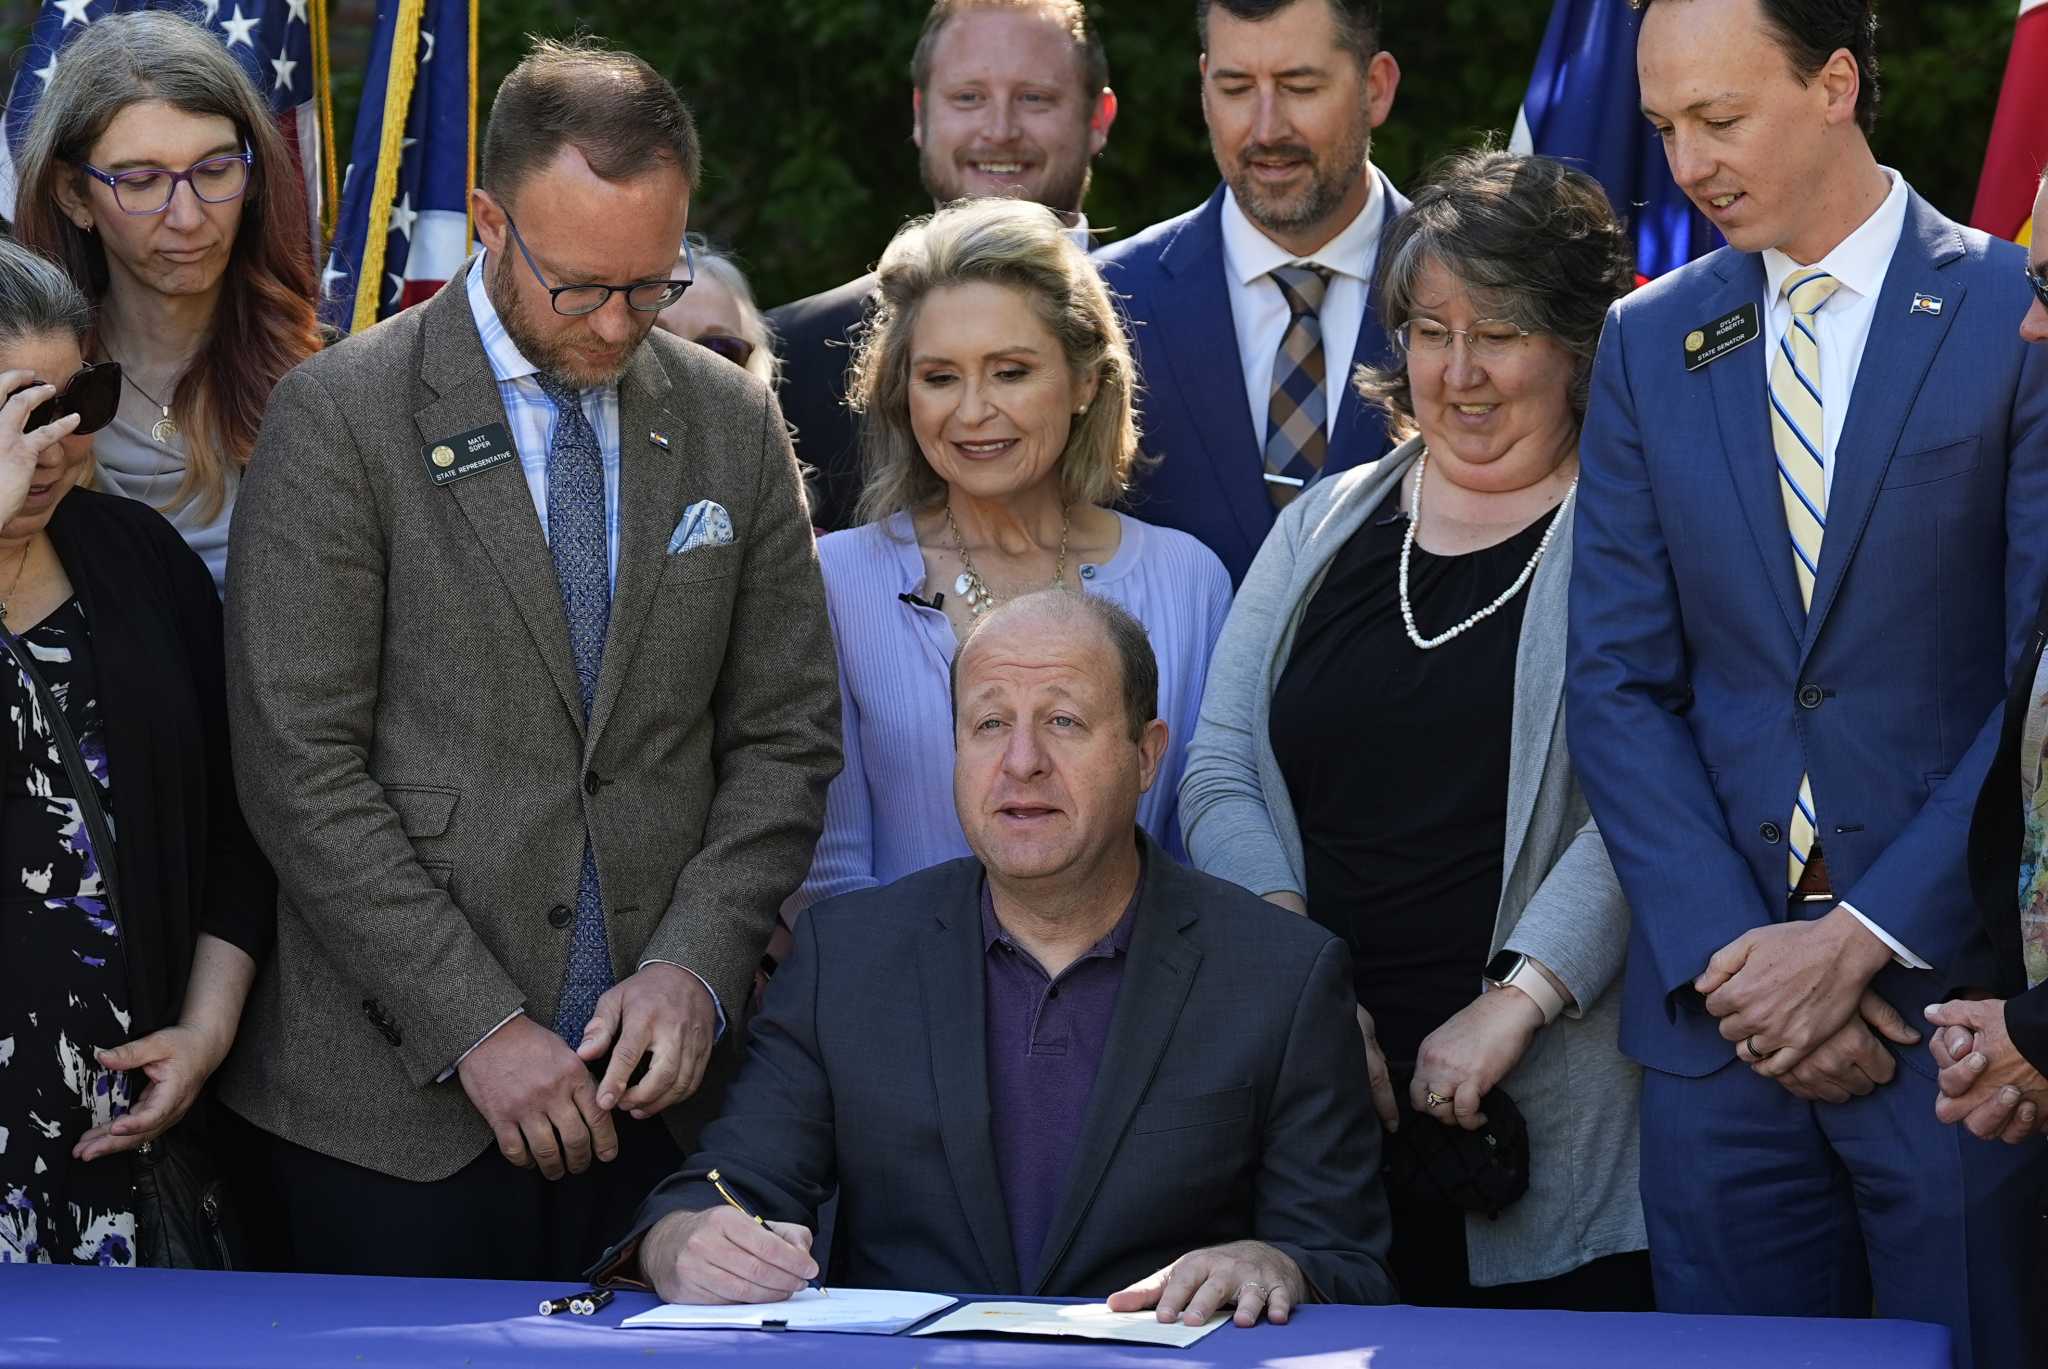 Colorado governor signs bills regulating funeral homes after discovery of 190 rotting bodies